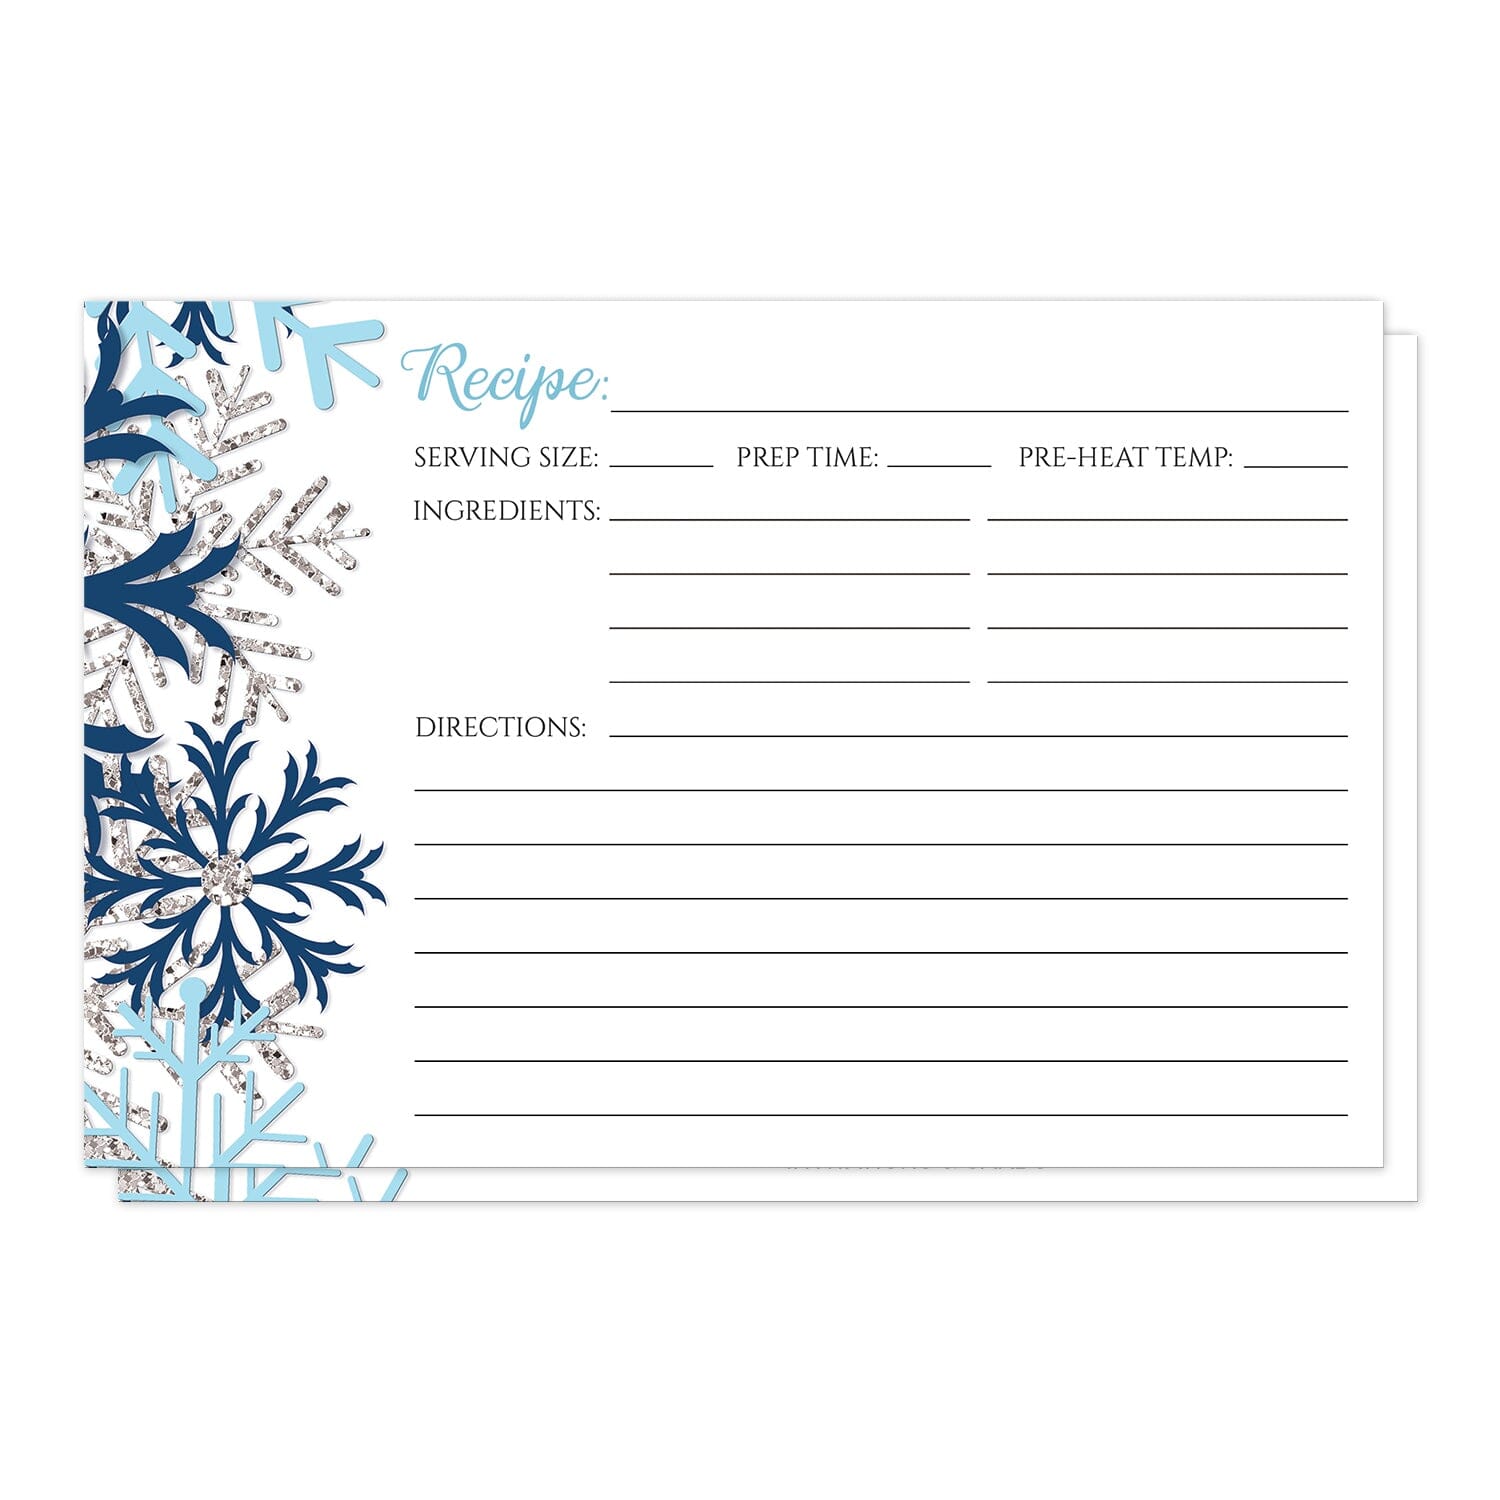 Winter Blue Silver Snowflake Recipe Cards at Artistically Invited. Winter blue silver snowflake recipe cards designed with aqua blue, navy blue, and silver-colored glitter-illustrated snowflakes along the left side. The recipe is to be handwritten over white on the remaining area of the recipe cards beside the snowflakes design.